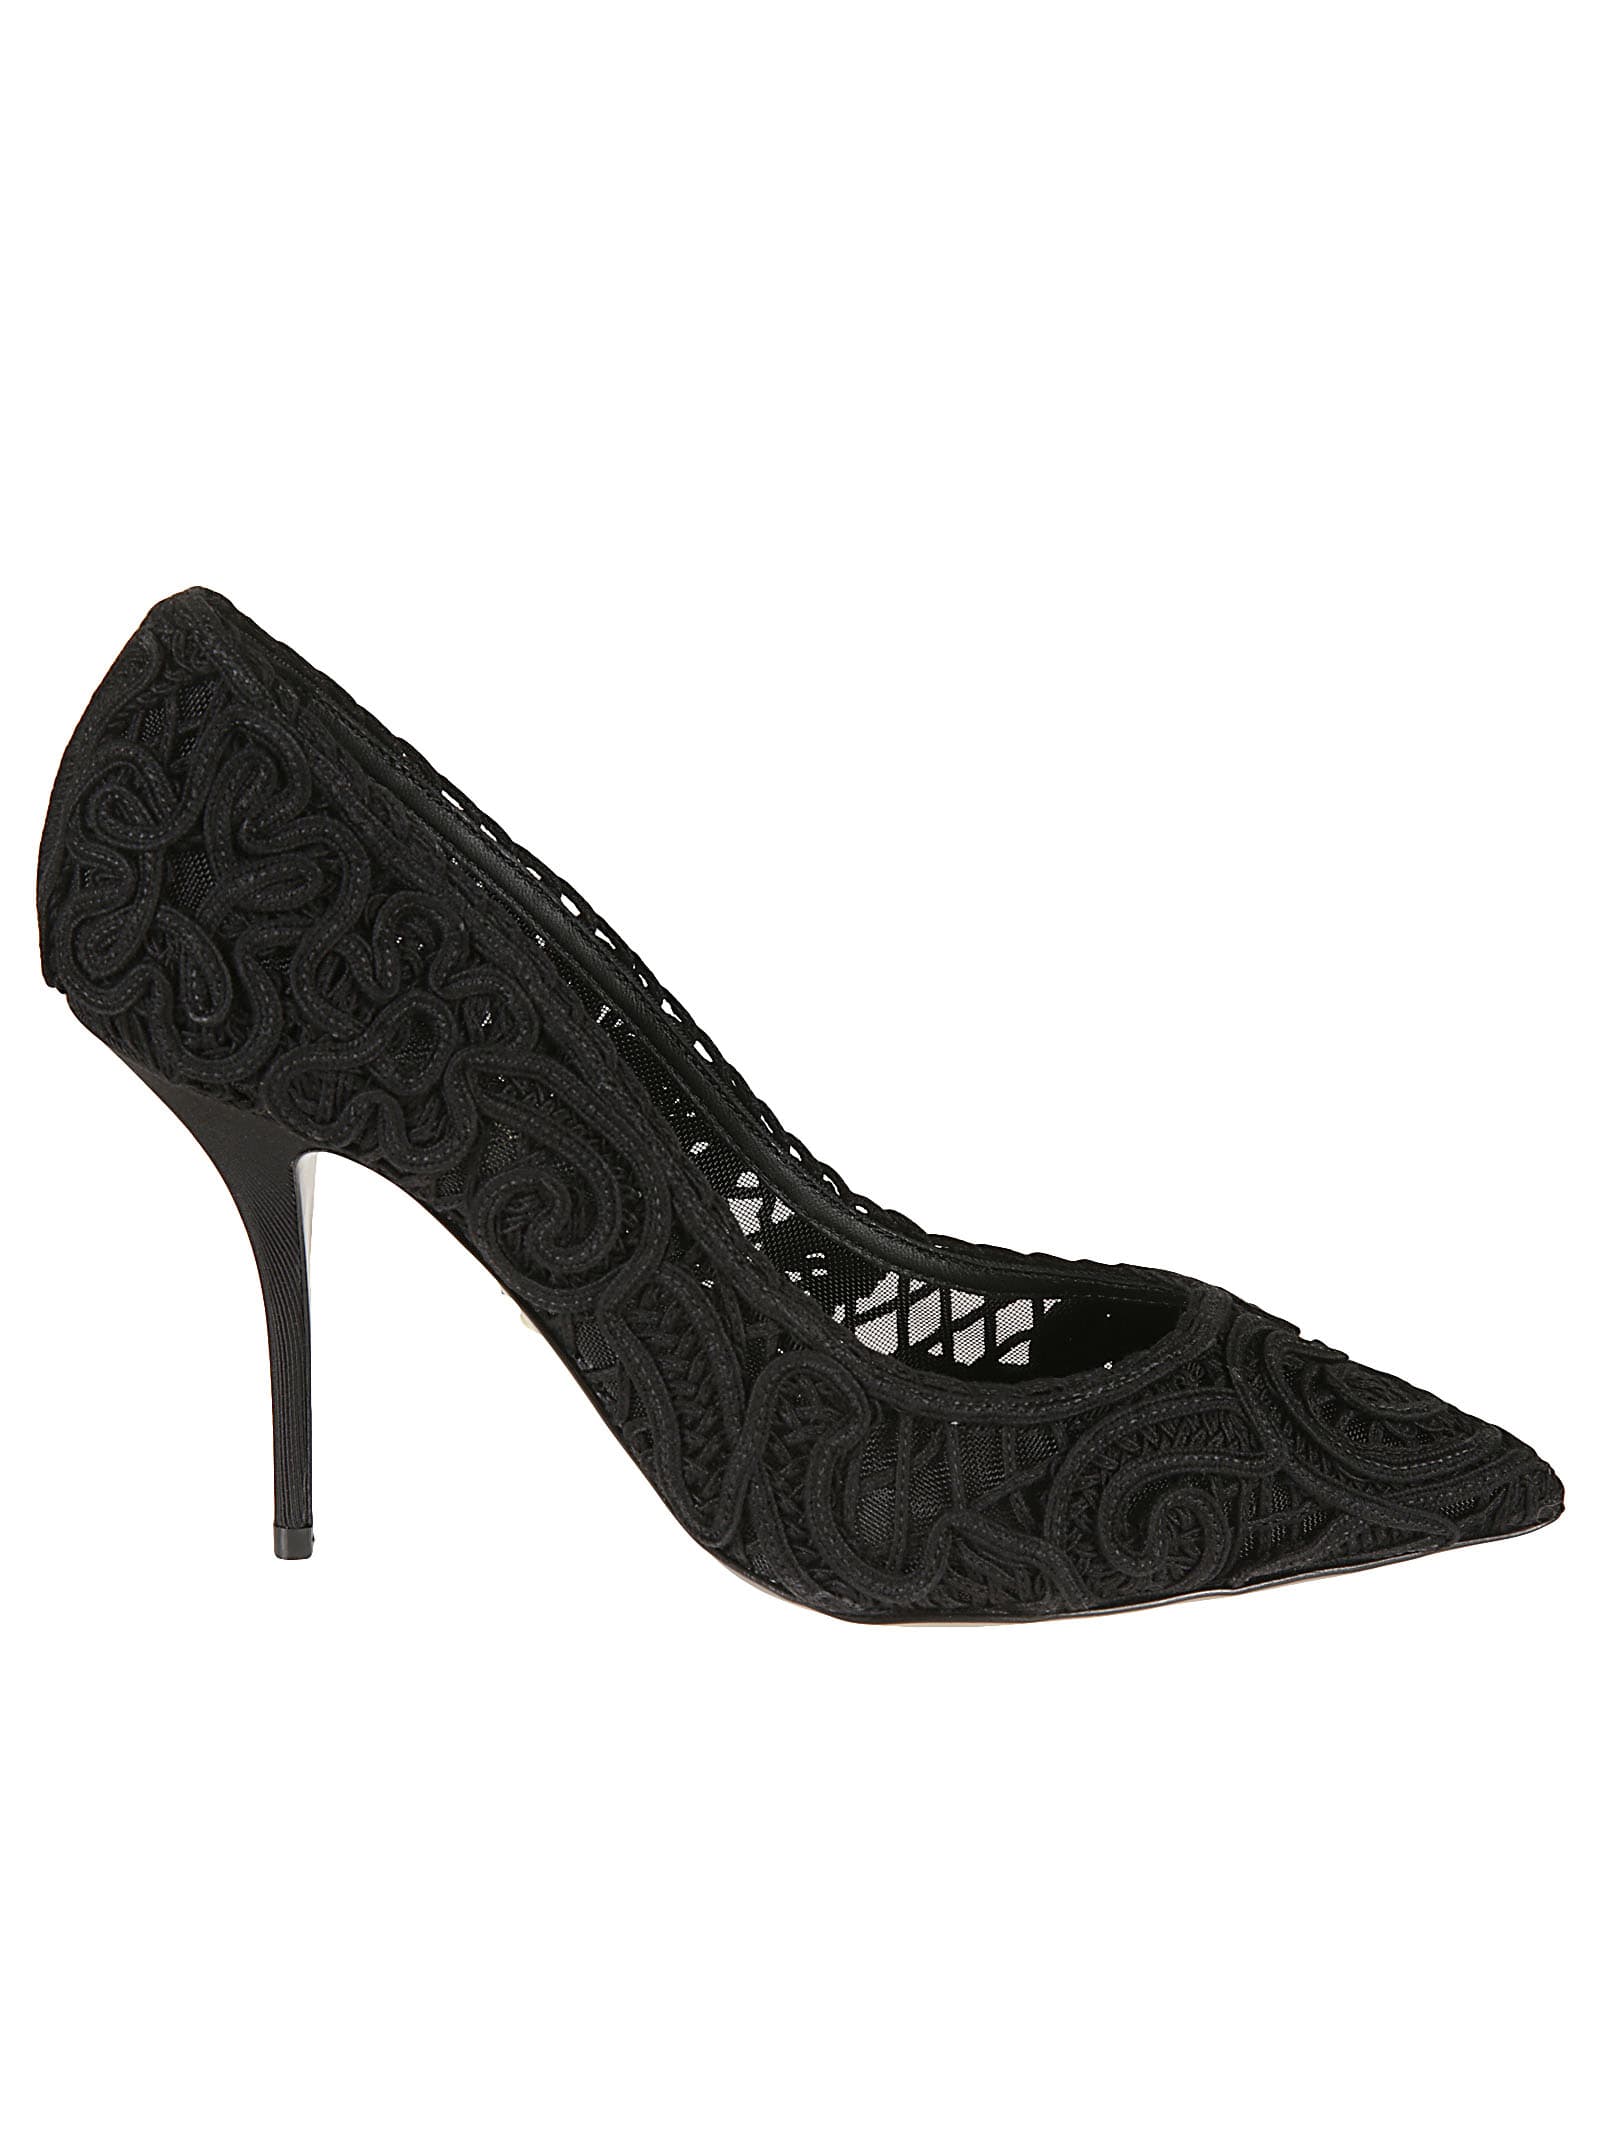 Buy Dolce & Gabbana Embroidered Heart Pumps online, shop Dolce & Gabbana shoes with free shipping